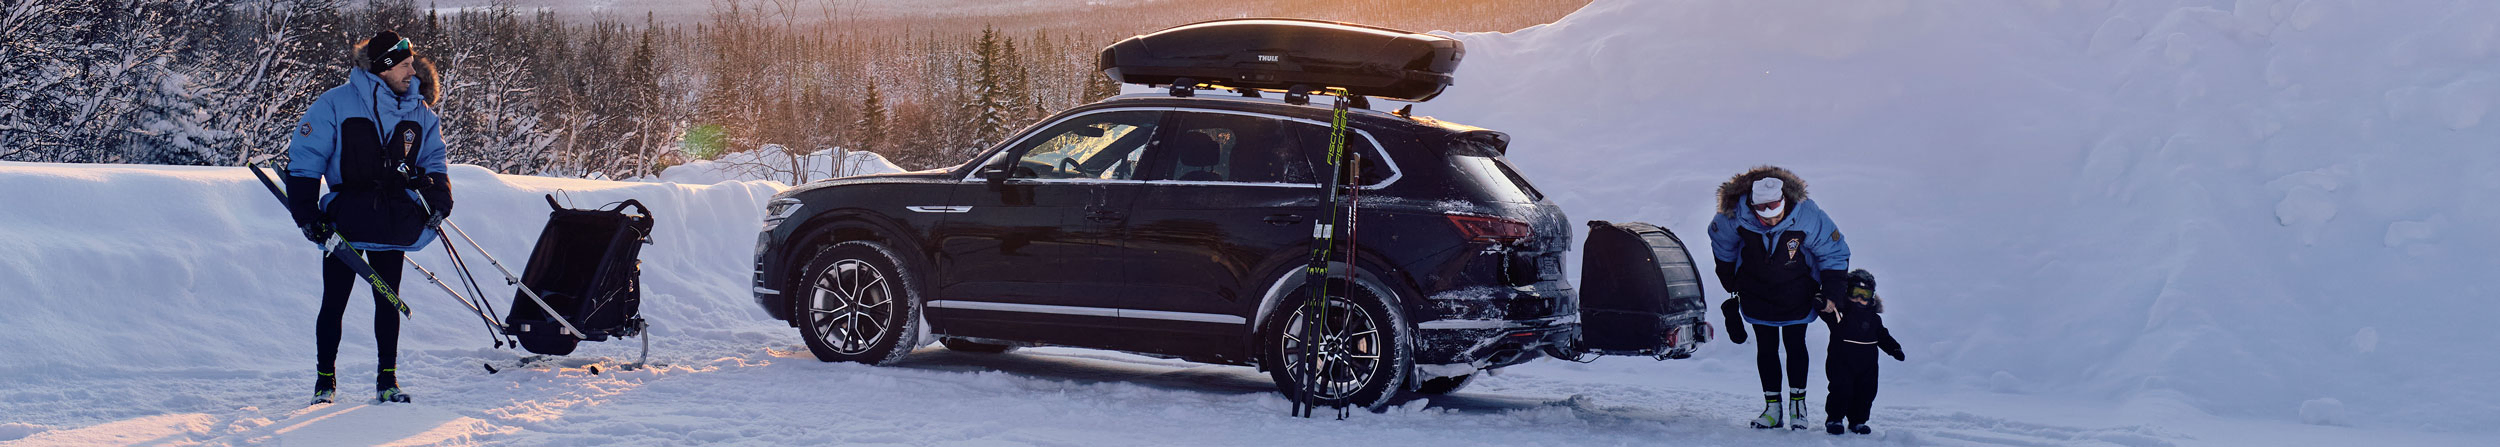 Transporting Skis in Thule Roof Boxes